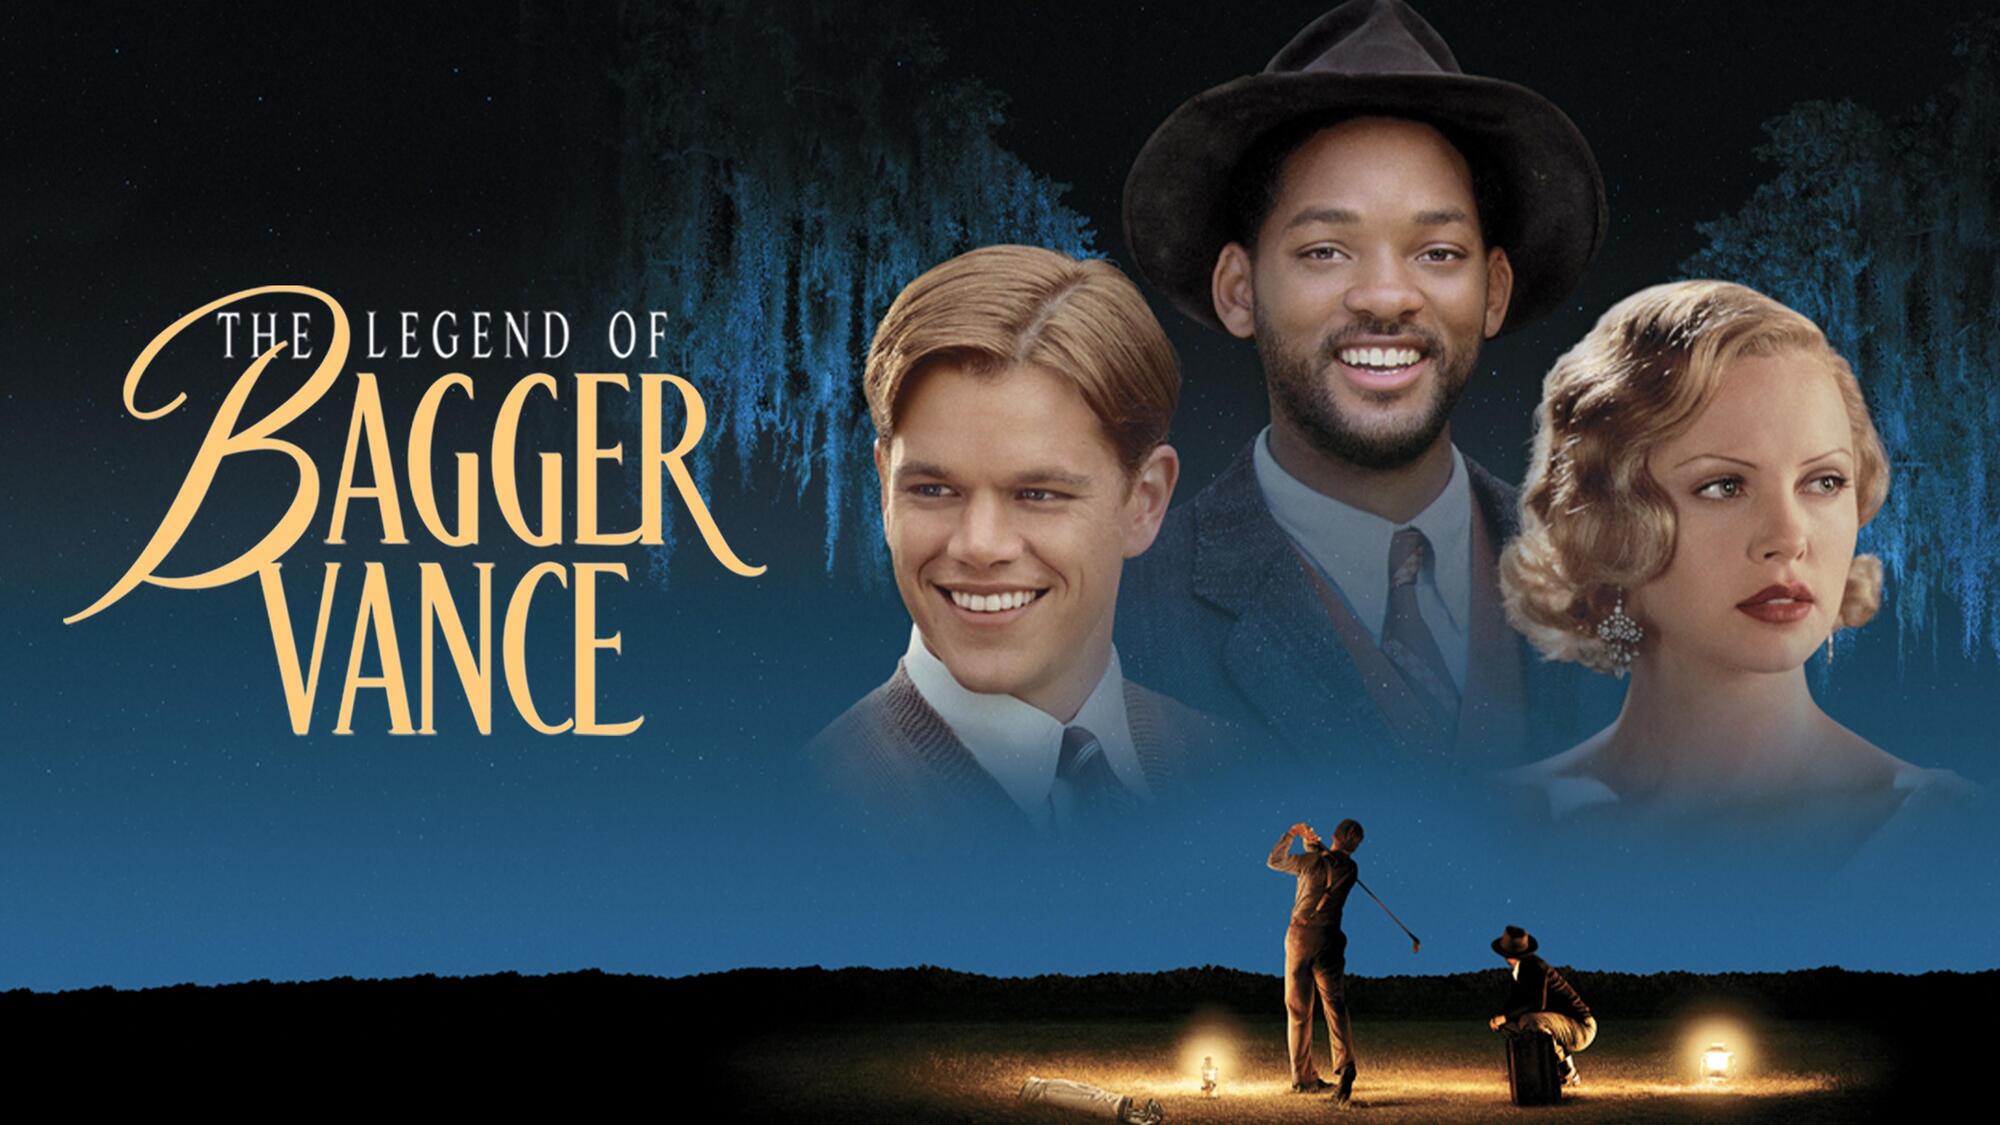 44-facts-about-the-movie-the-legend-of-bagger-vance